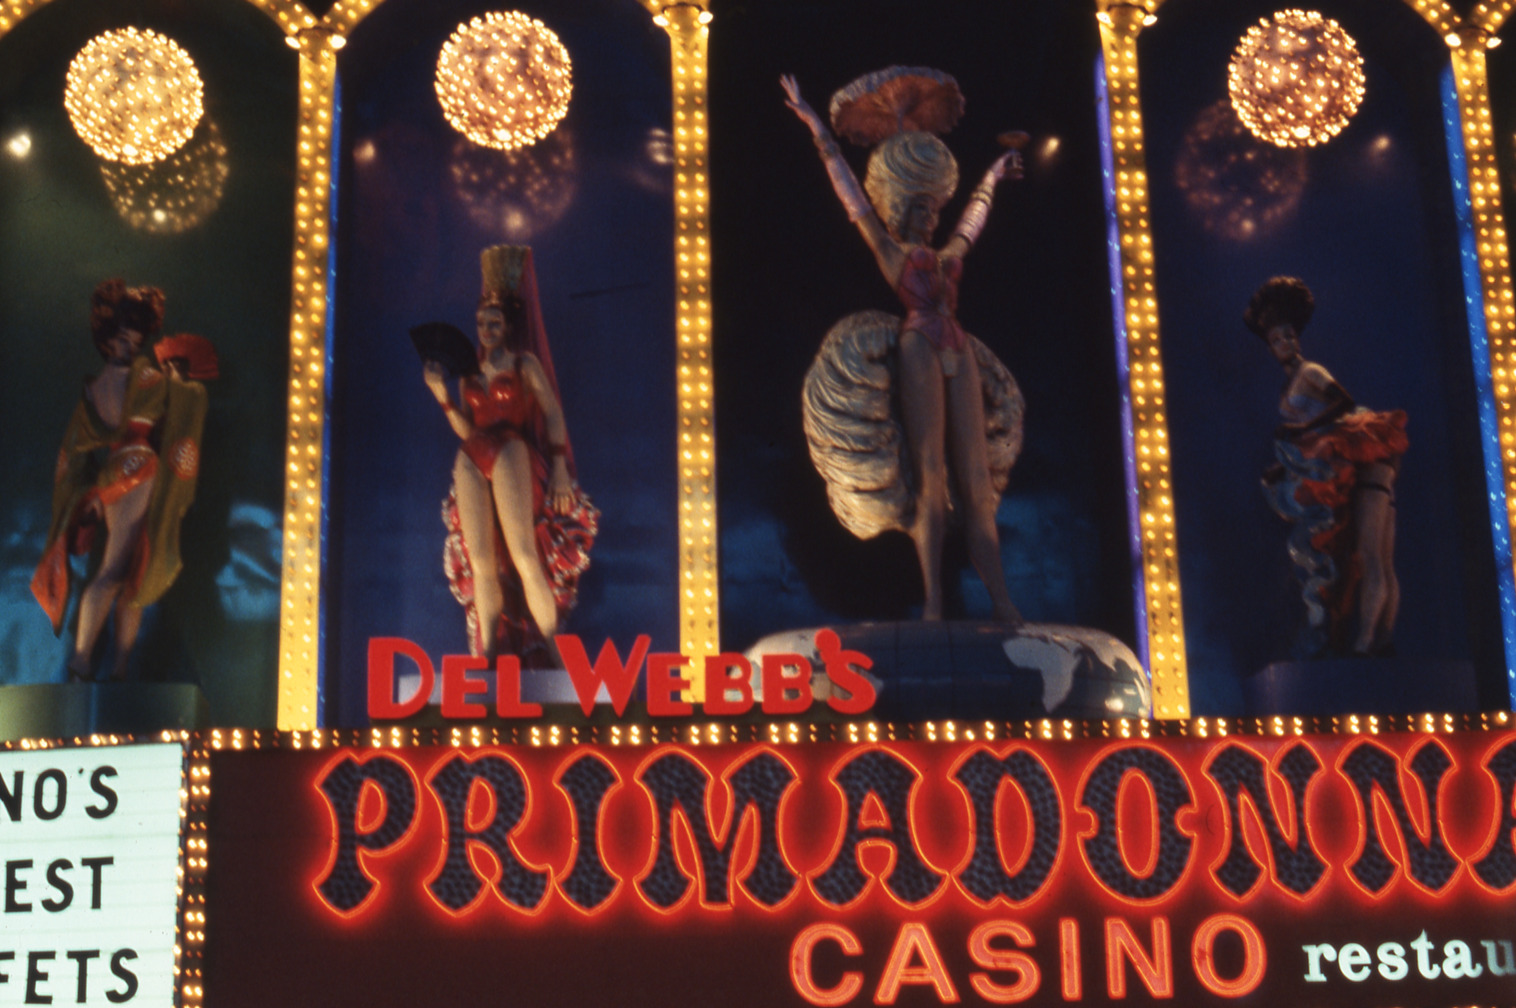 Primadonna Club marquee and wall signs, Reno, Nevada: photographic print